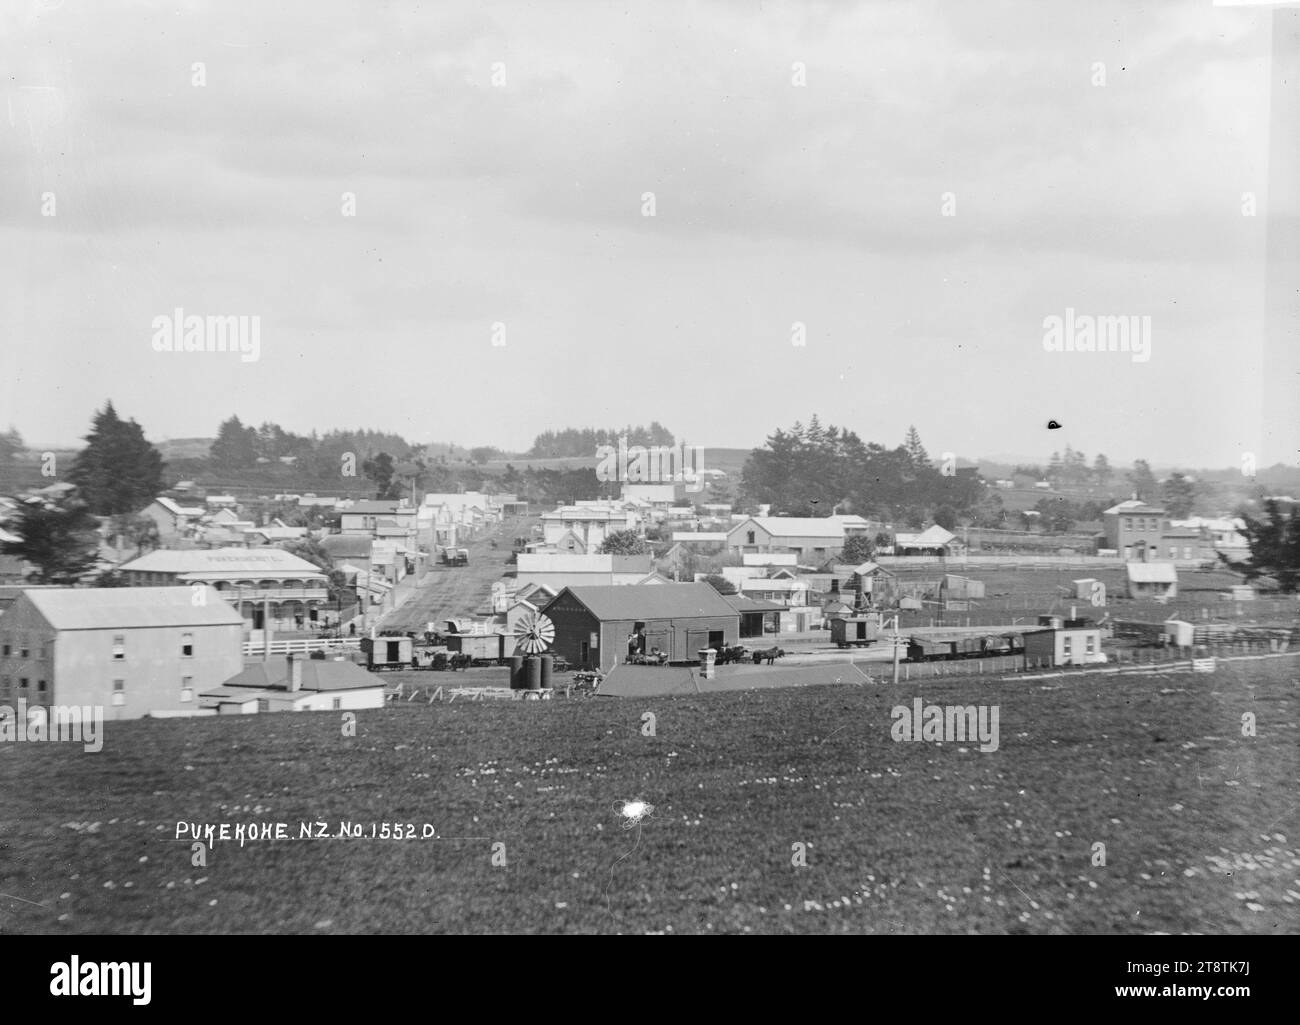 General view of Pukekohe, View of Pukekohe looking across a grassy area towards the railway station and business premises in the middle distance. The Pukekohe Hotel (with name on the roof) is on the left opposite the railway yard. Photograph taken ca 1910 Stock Photo